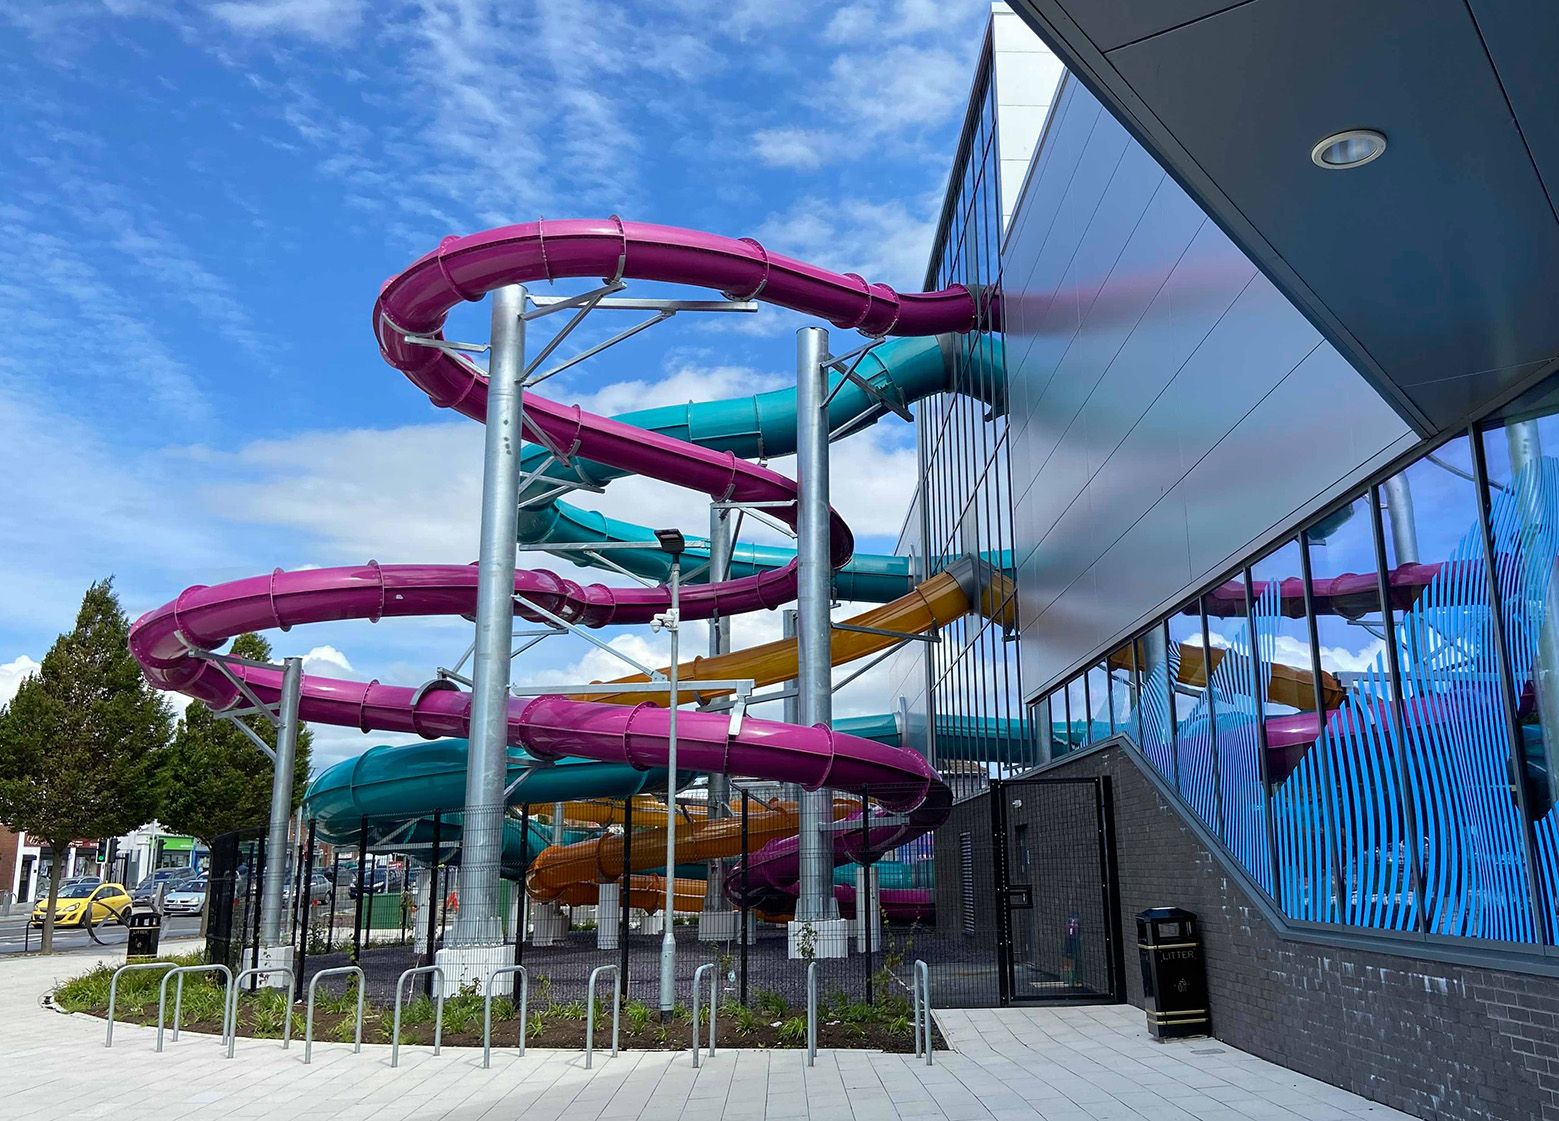 The new Andersonstown Leisure Centre fully opened last June and since then has welcomed over a quarter of a million visitors to the world class indoor water park with high speed slides, surf simulator and aqua play area.